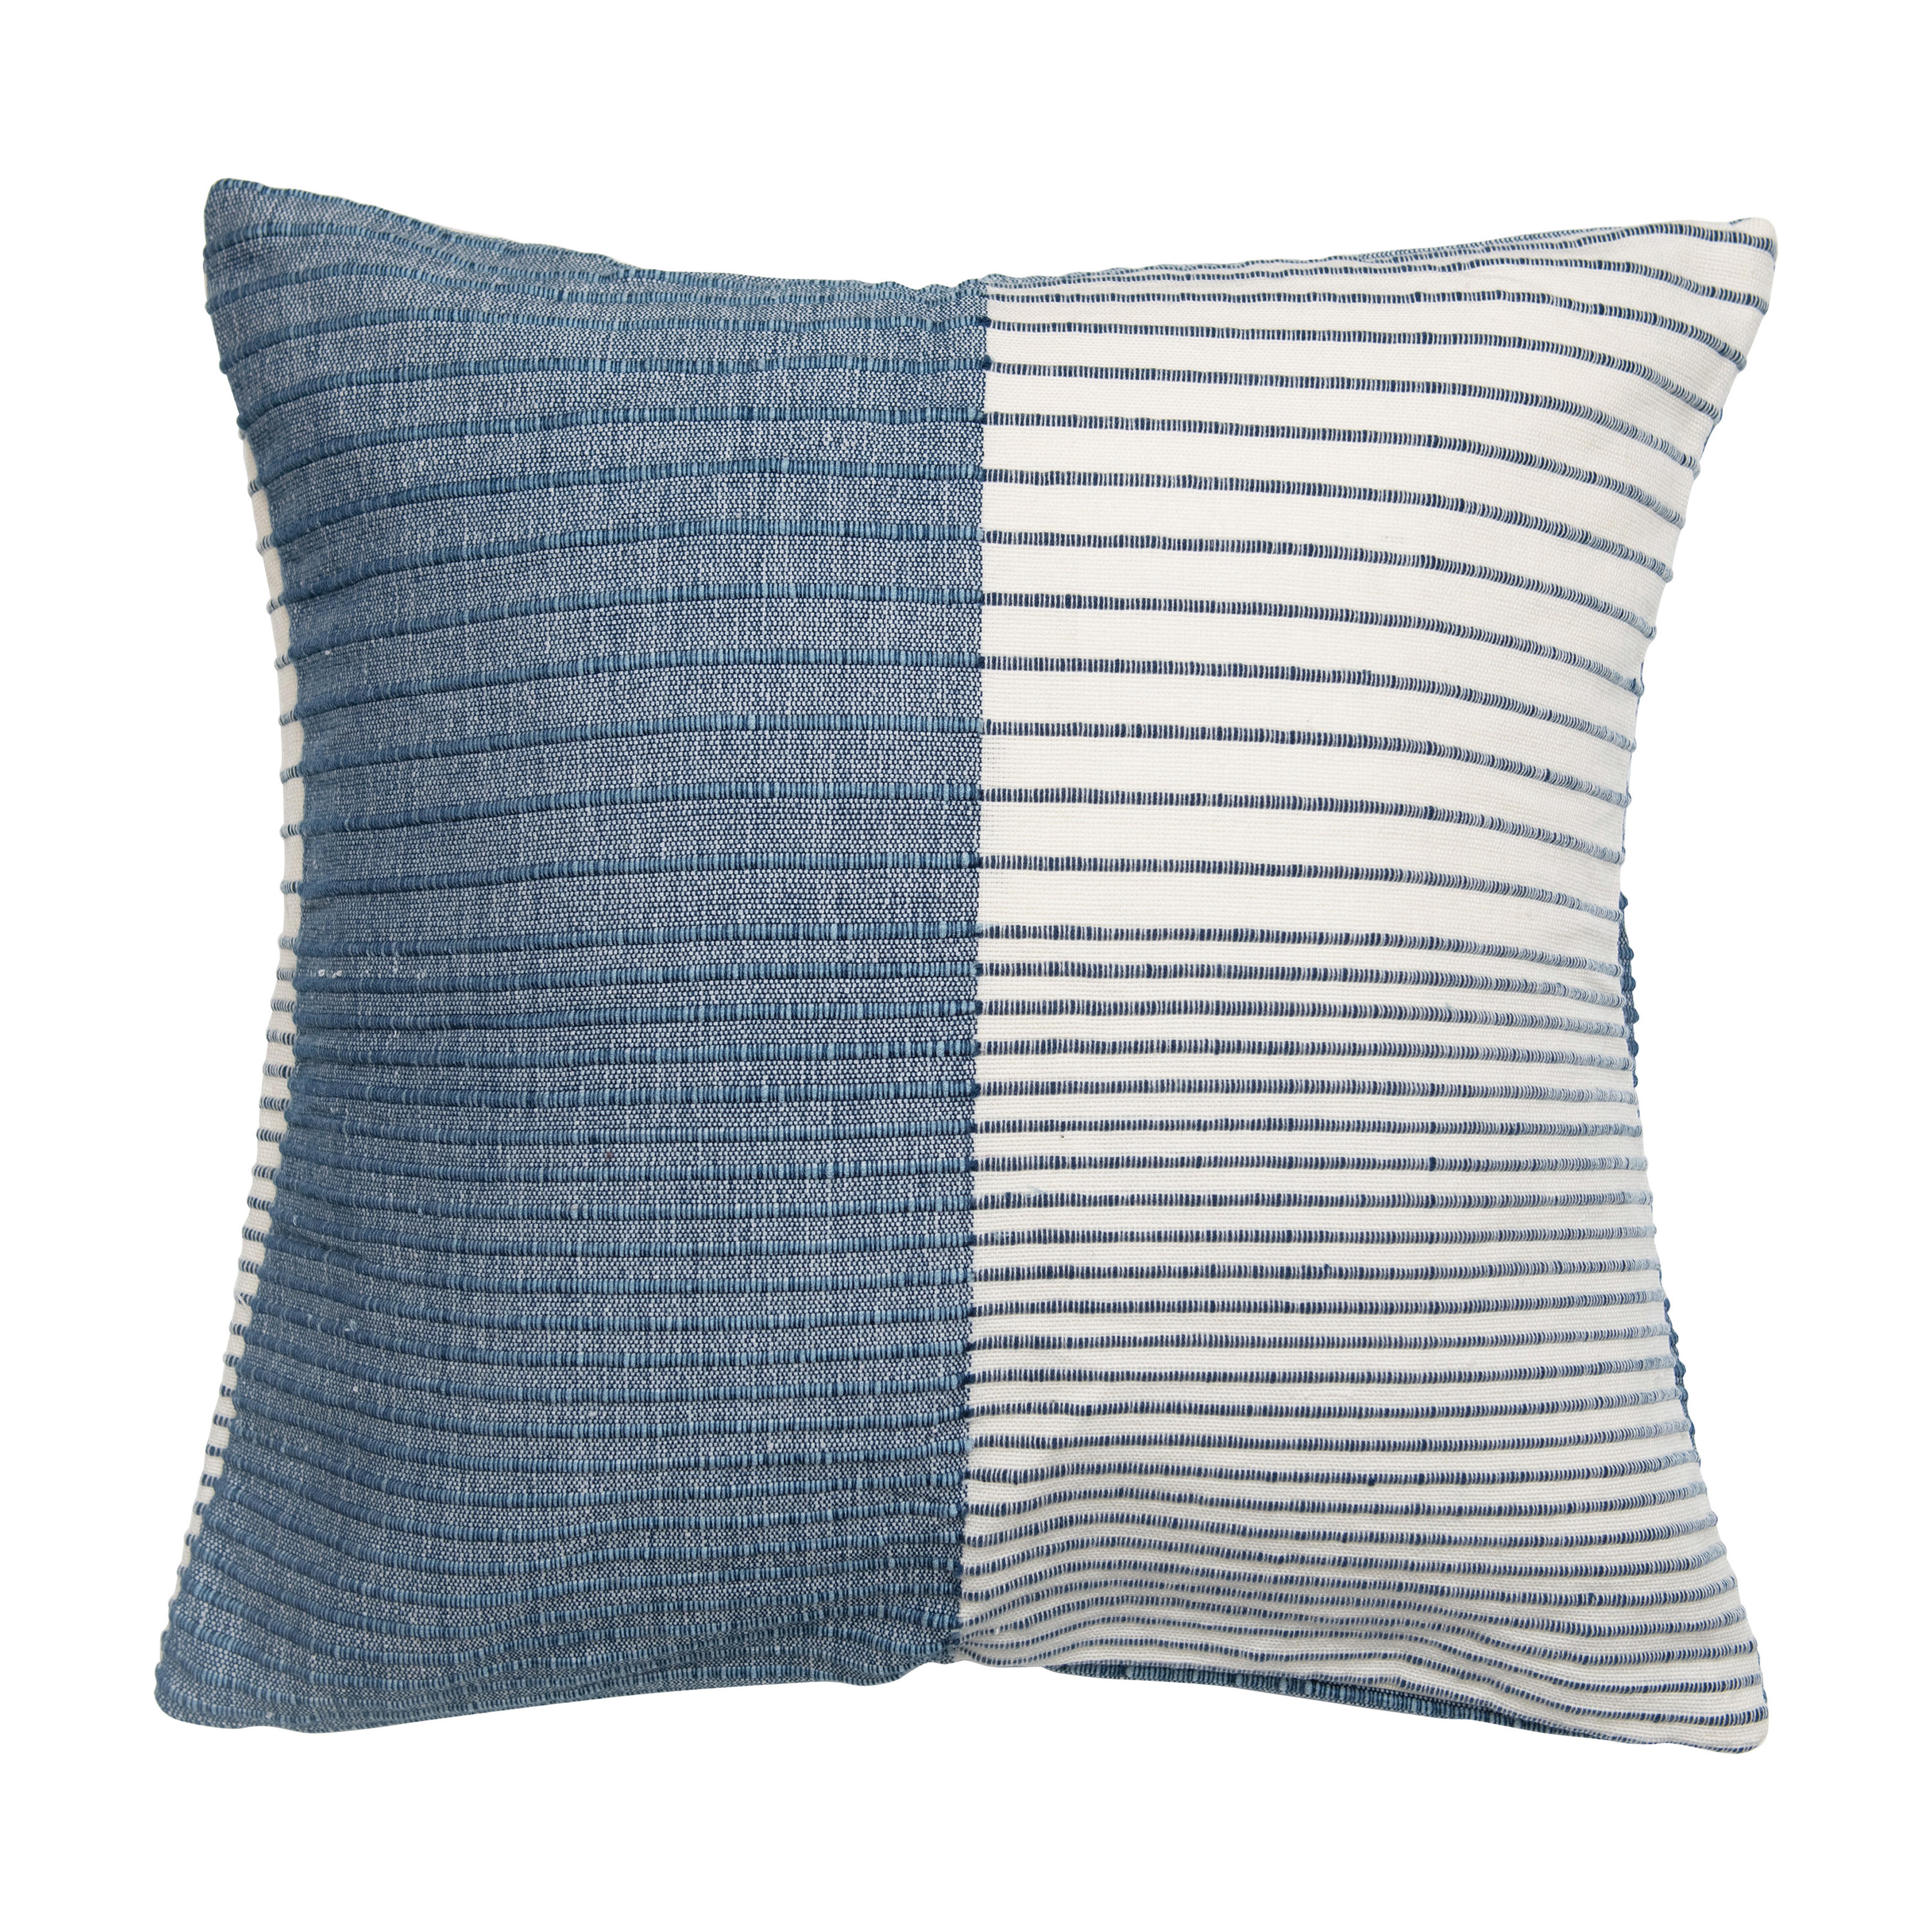 24" Square Woven Wool & Cotton Pillow with Stripes - Nomad Home